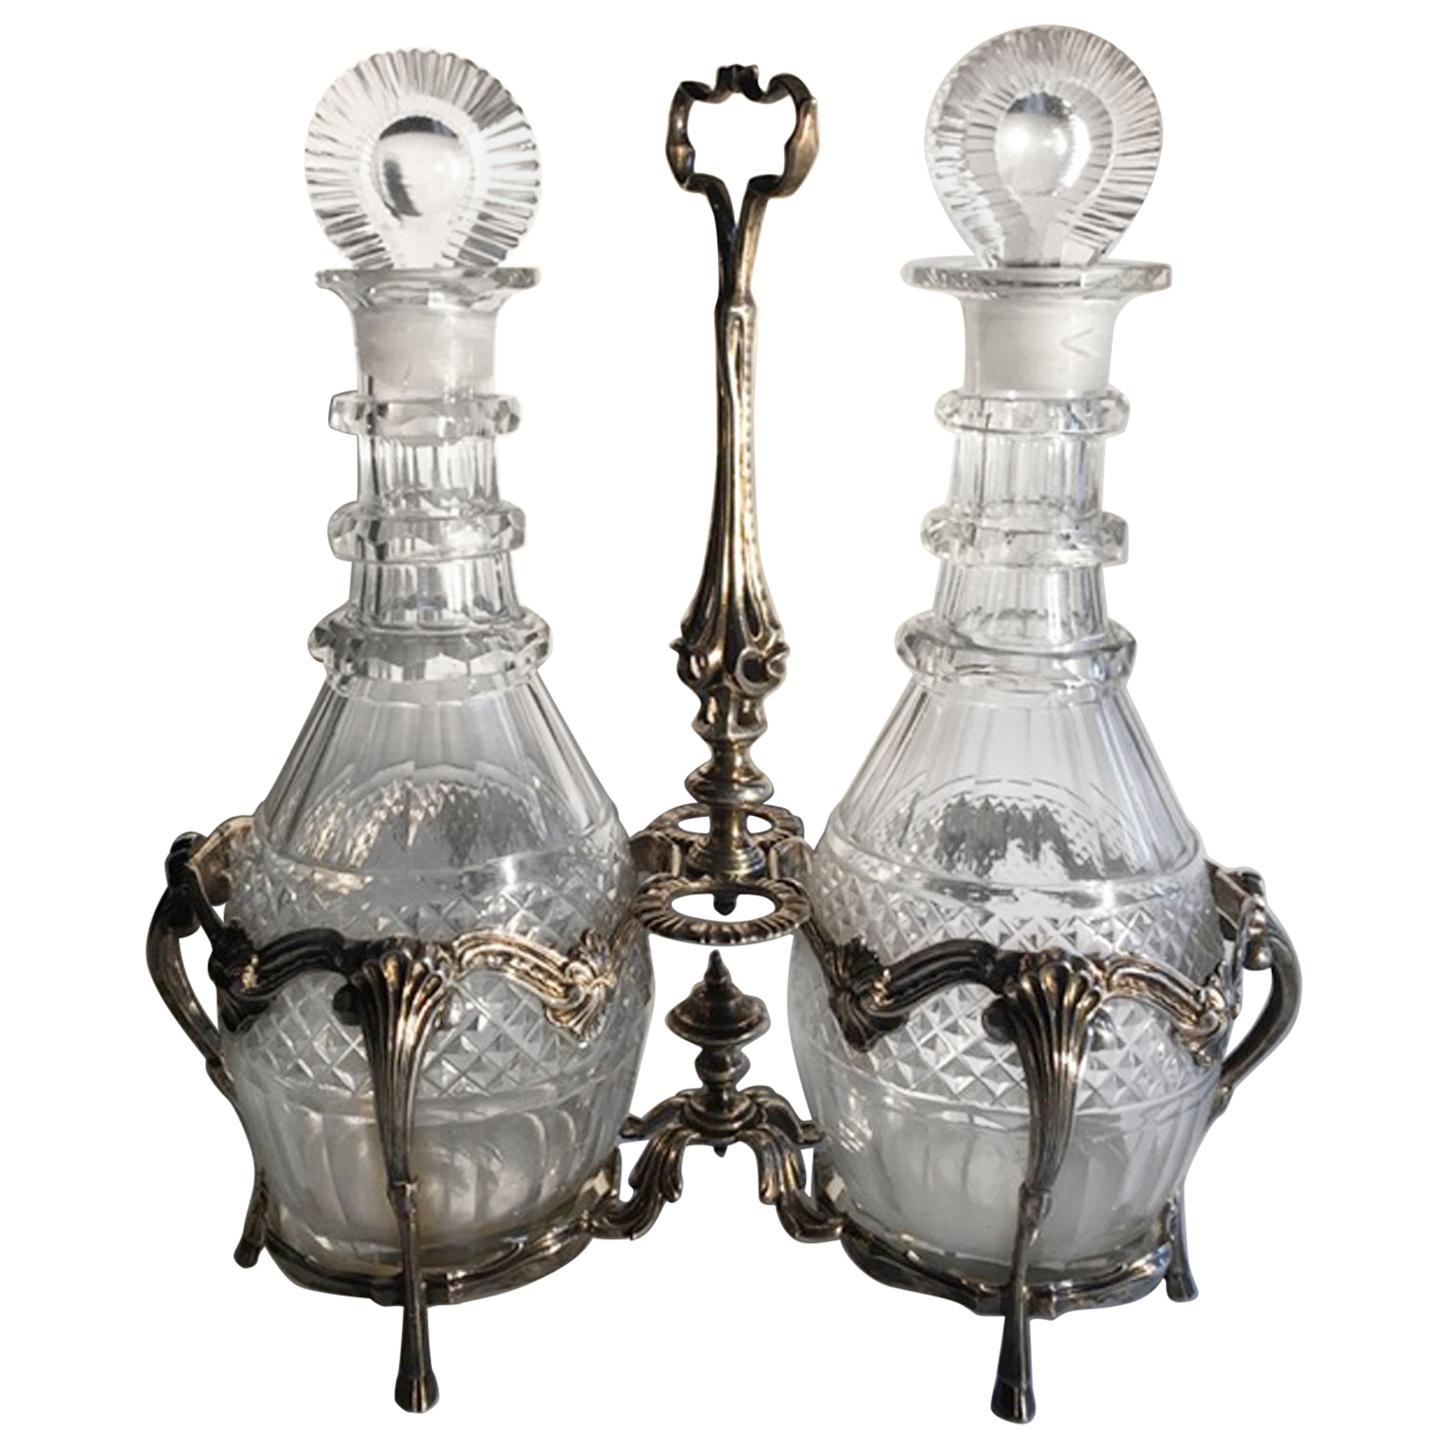 London 1750 George IV Silver Cruet Service Set with Two Cut Glass Bottles For Sale